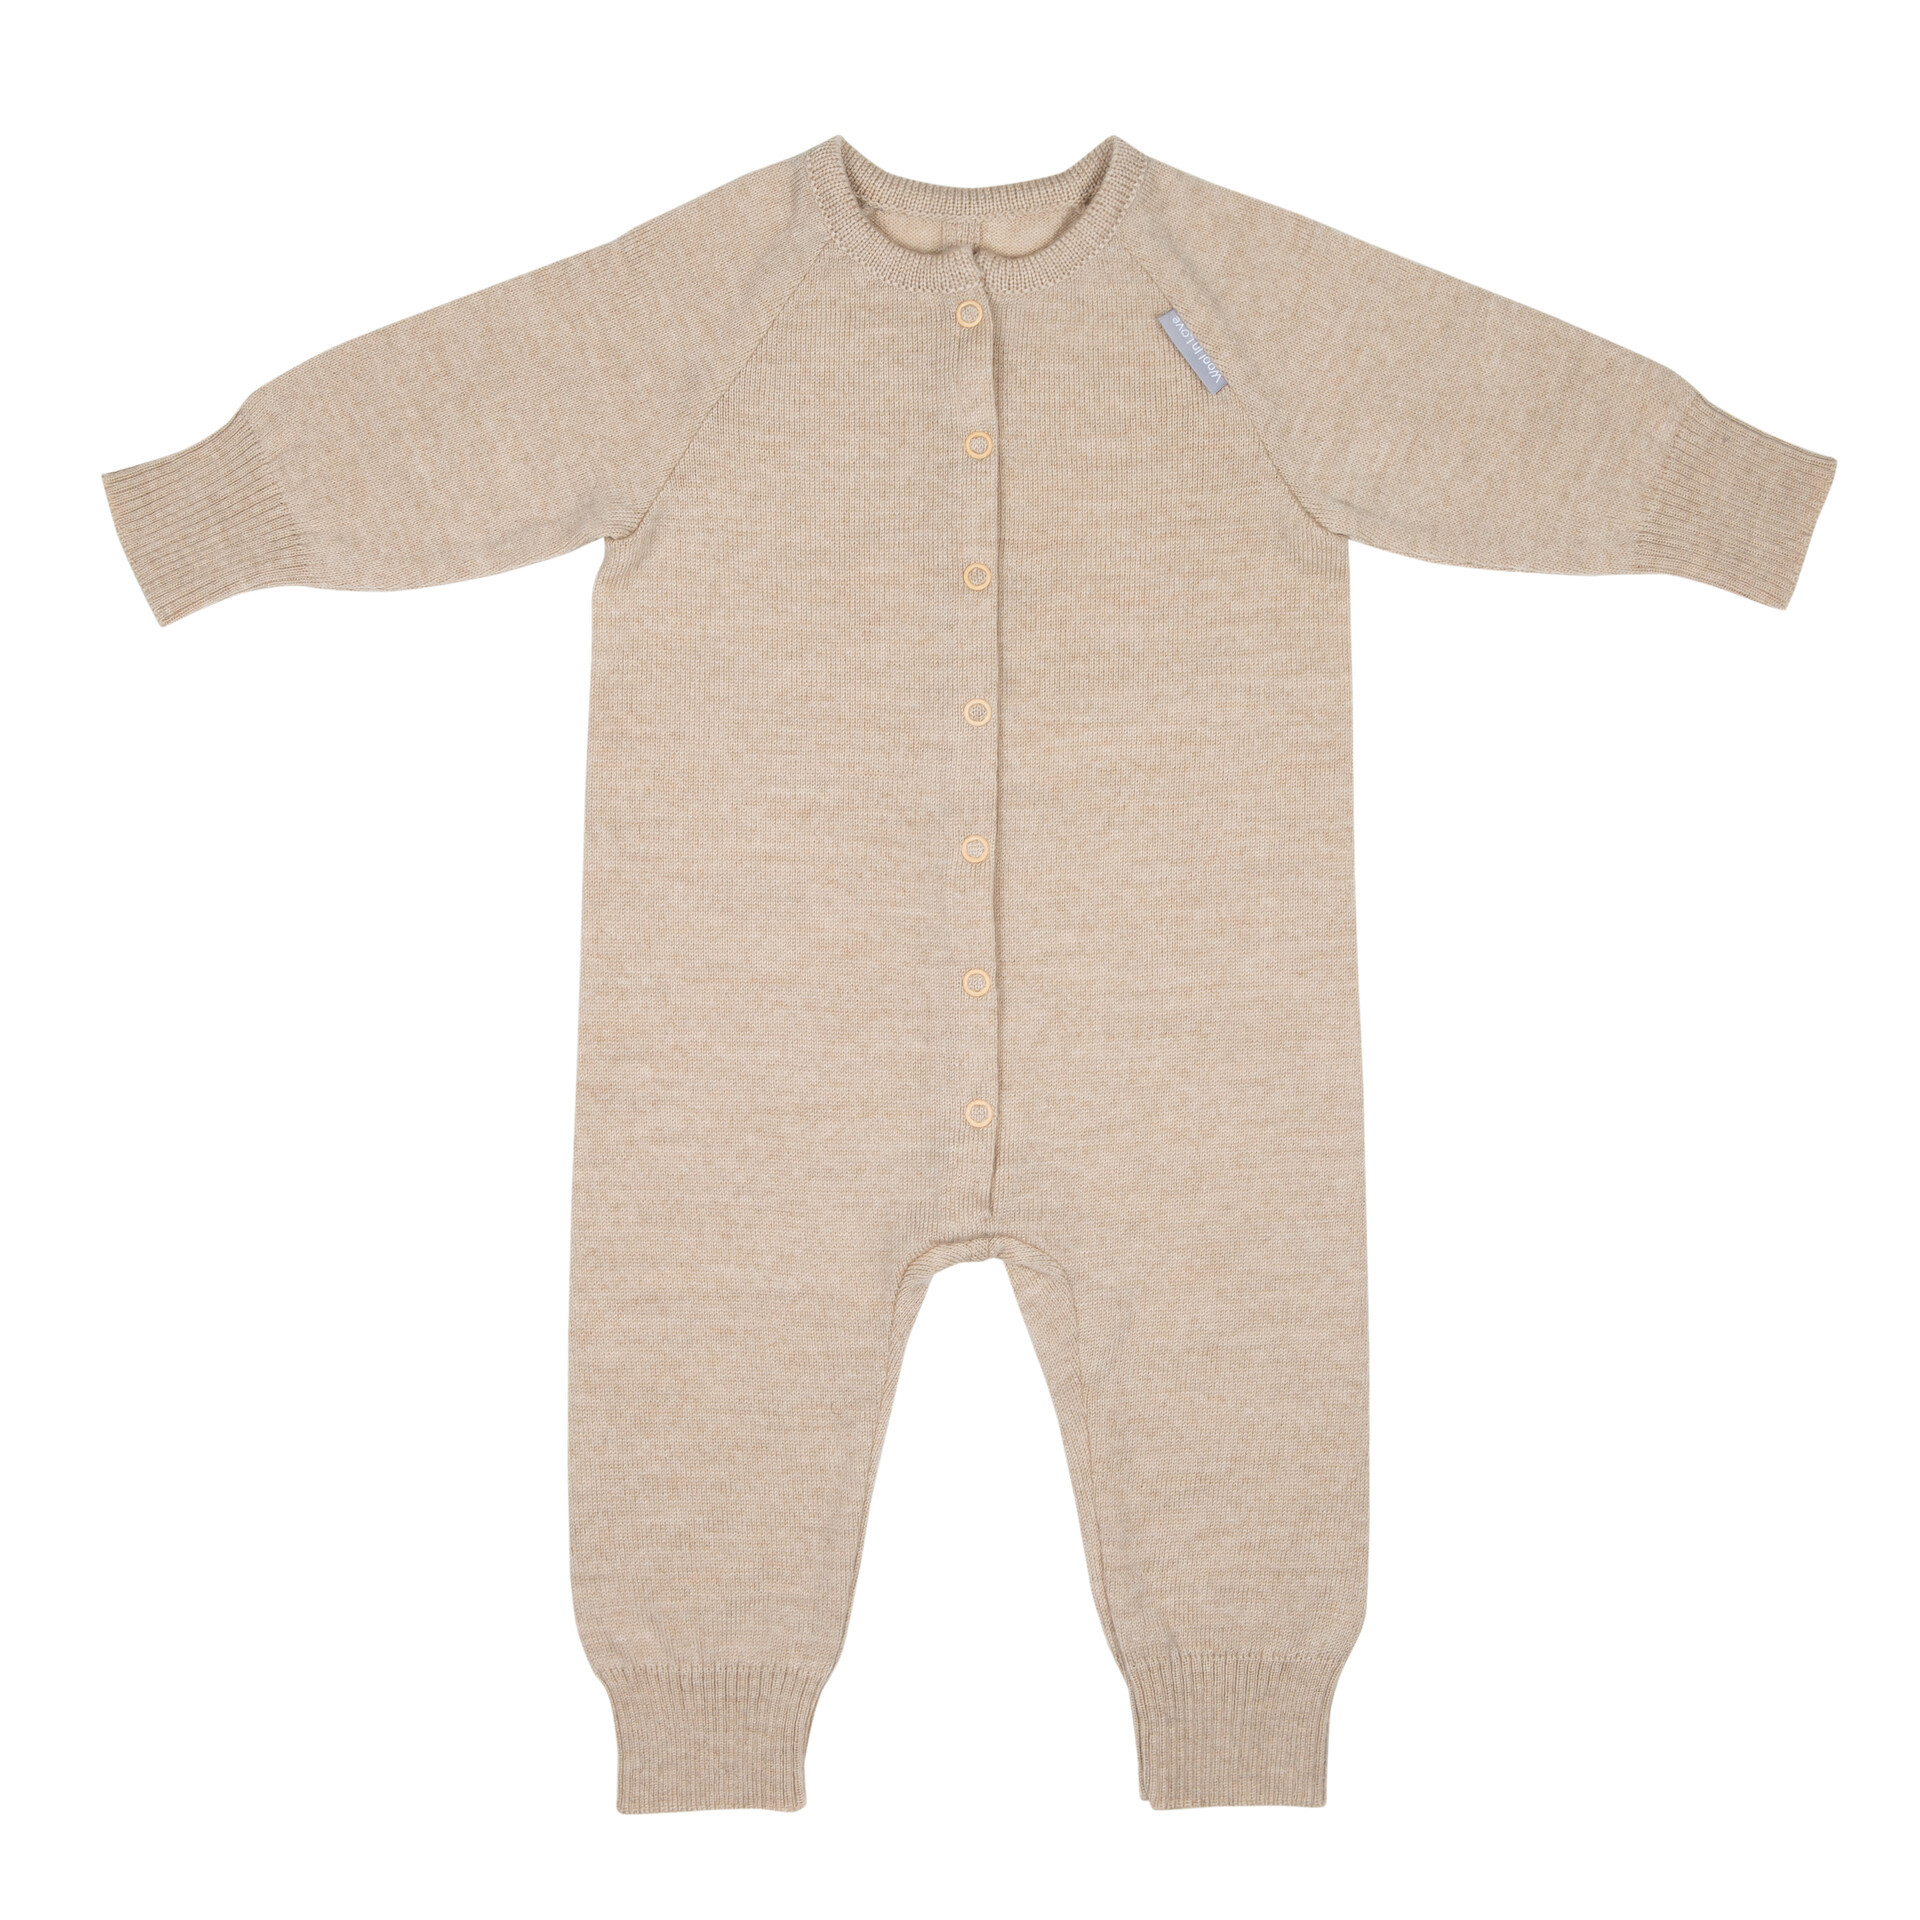 Merino onesie, This garment is knitted from pure extra fine merino wool, a warm natural material that is exceptionally soft and light, designed to be all-day comfort from sleeping to playing.